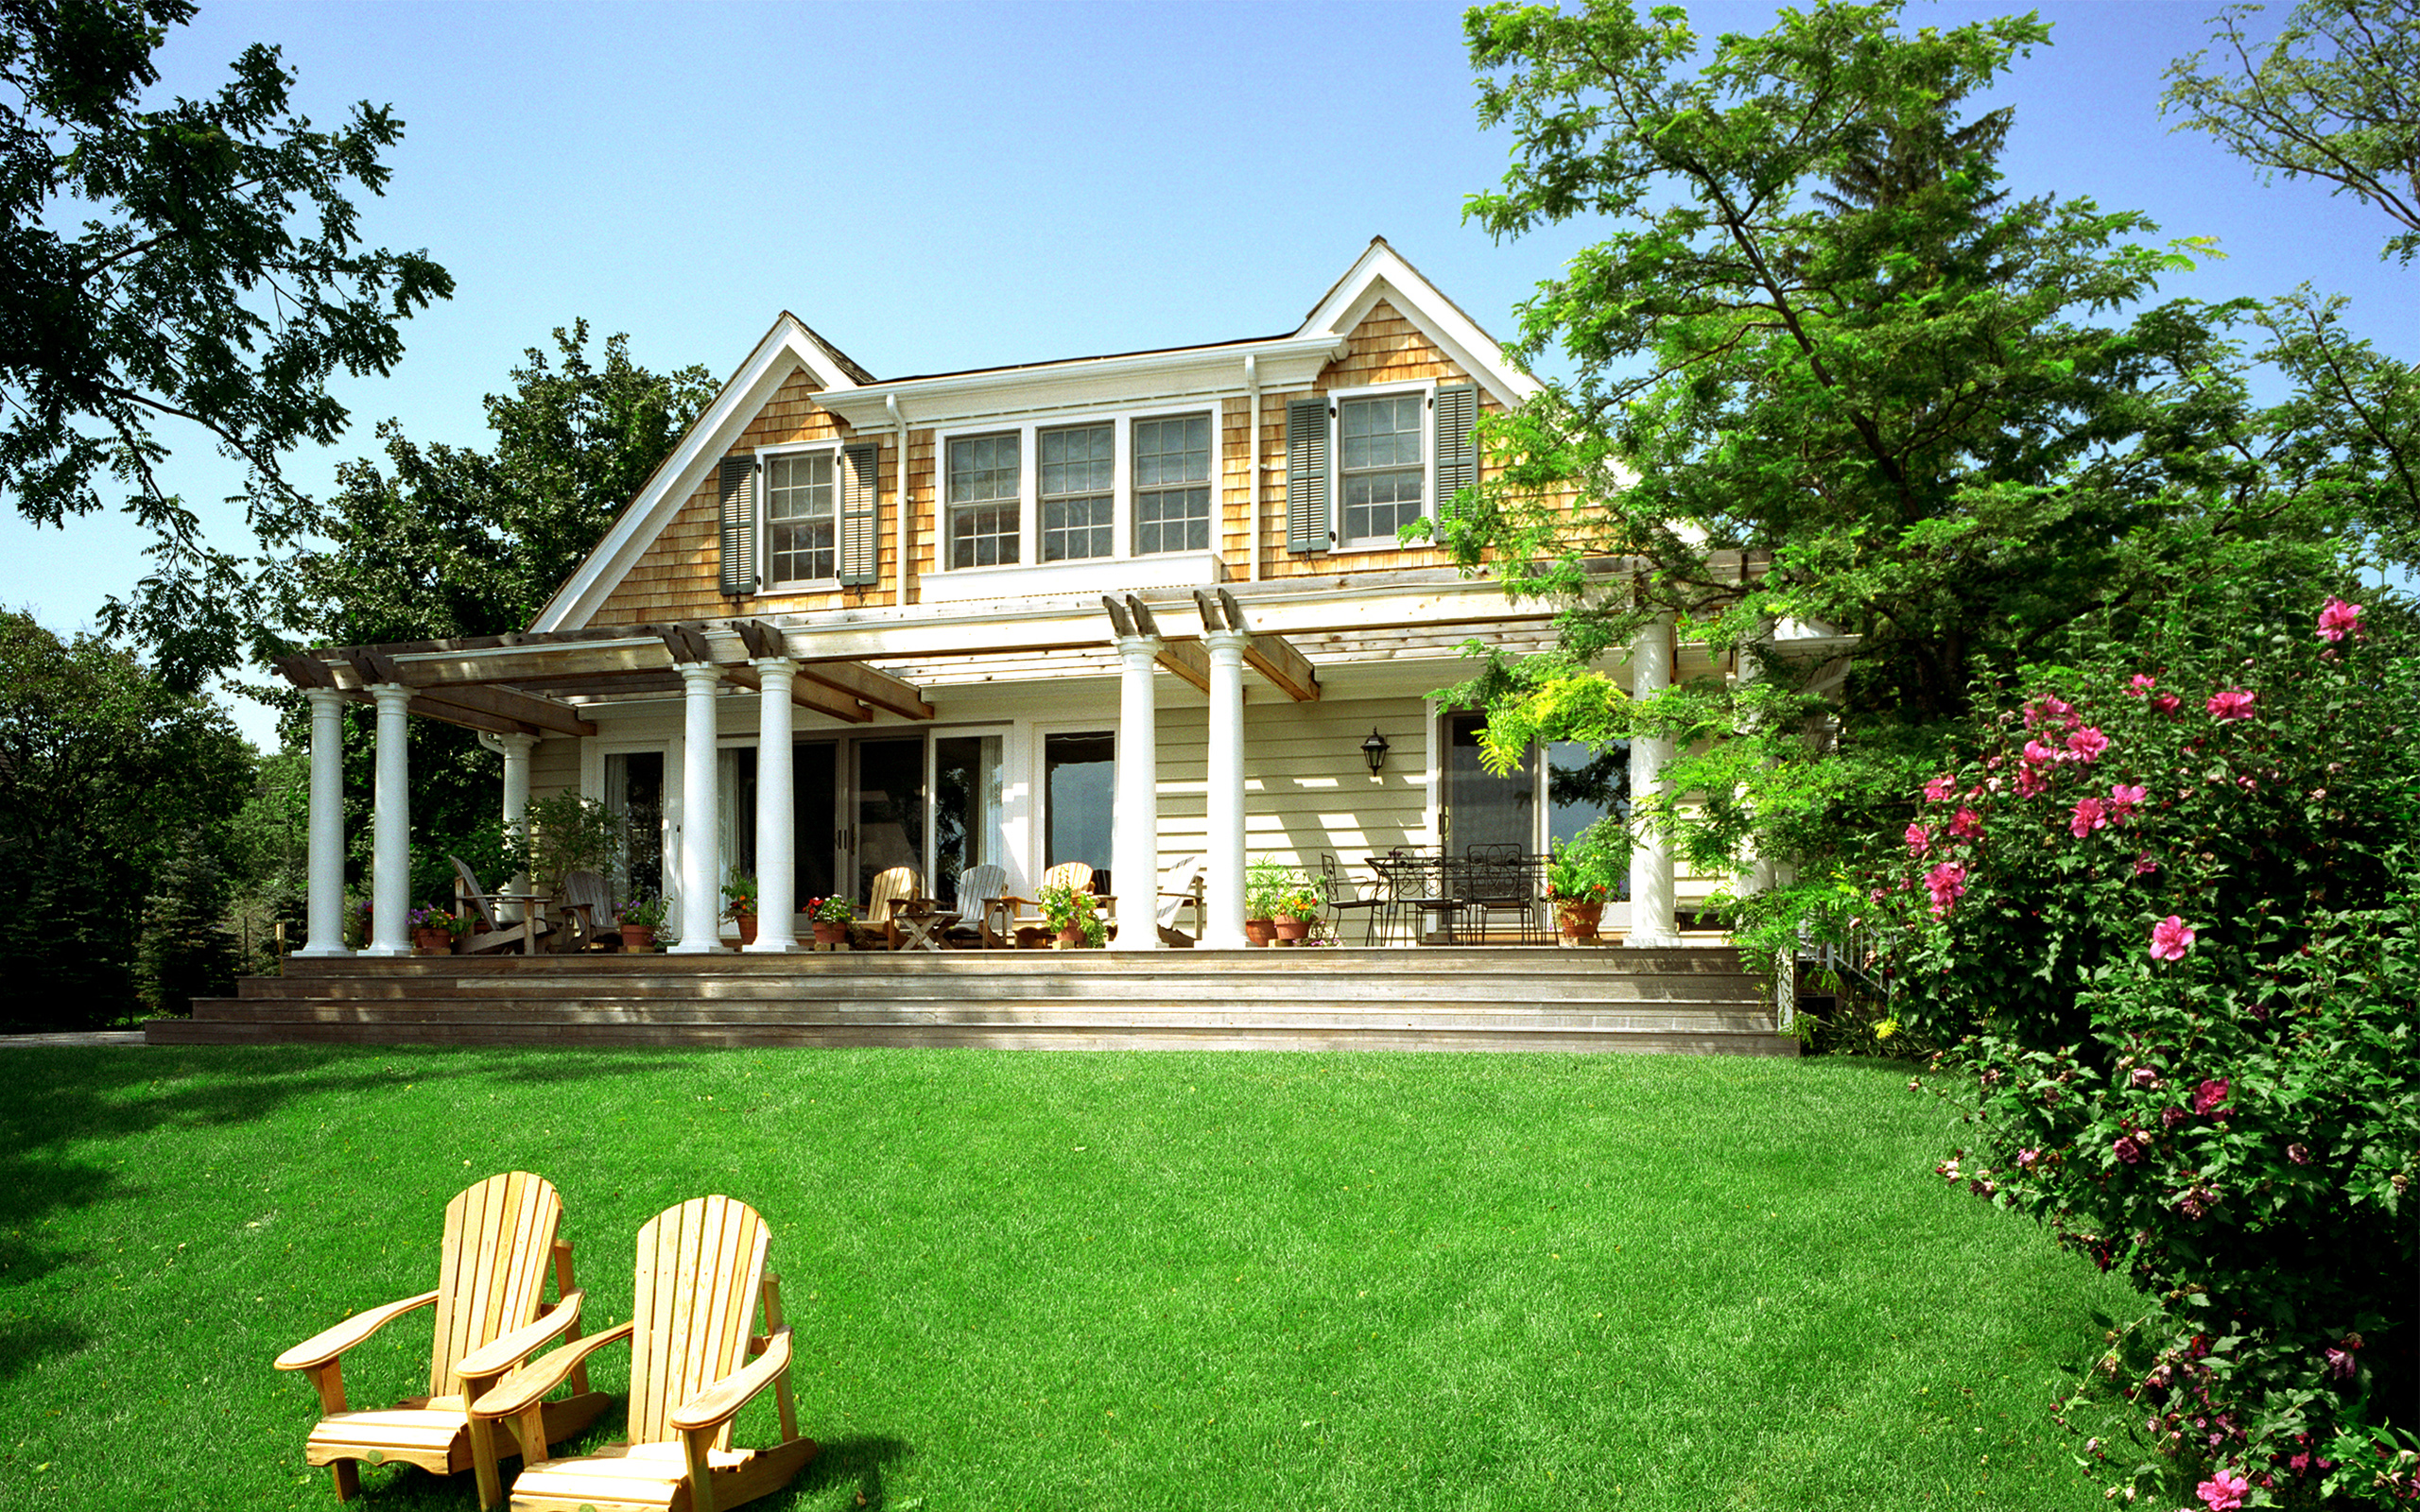 Adirondack chairs in front of a large yellow house with white columns